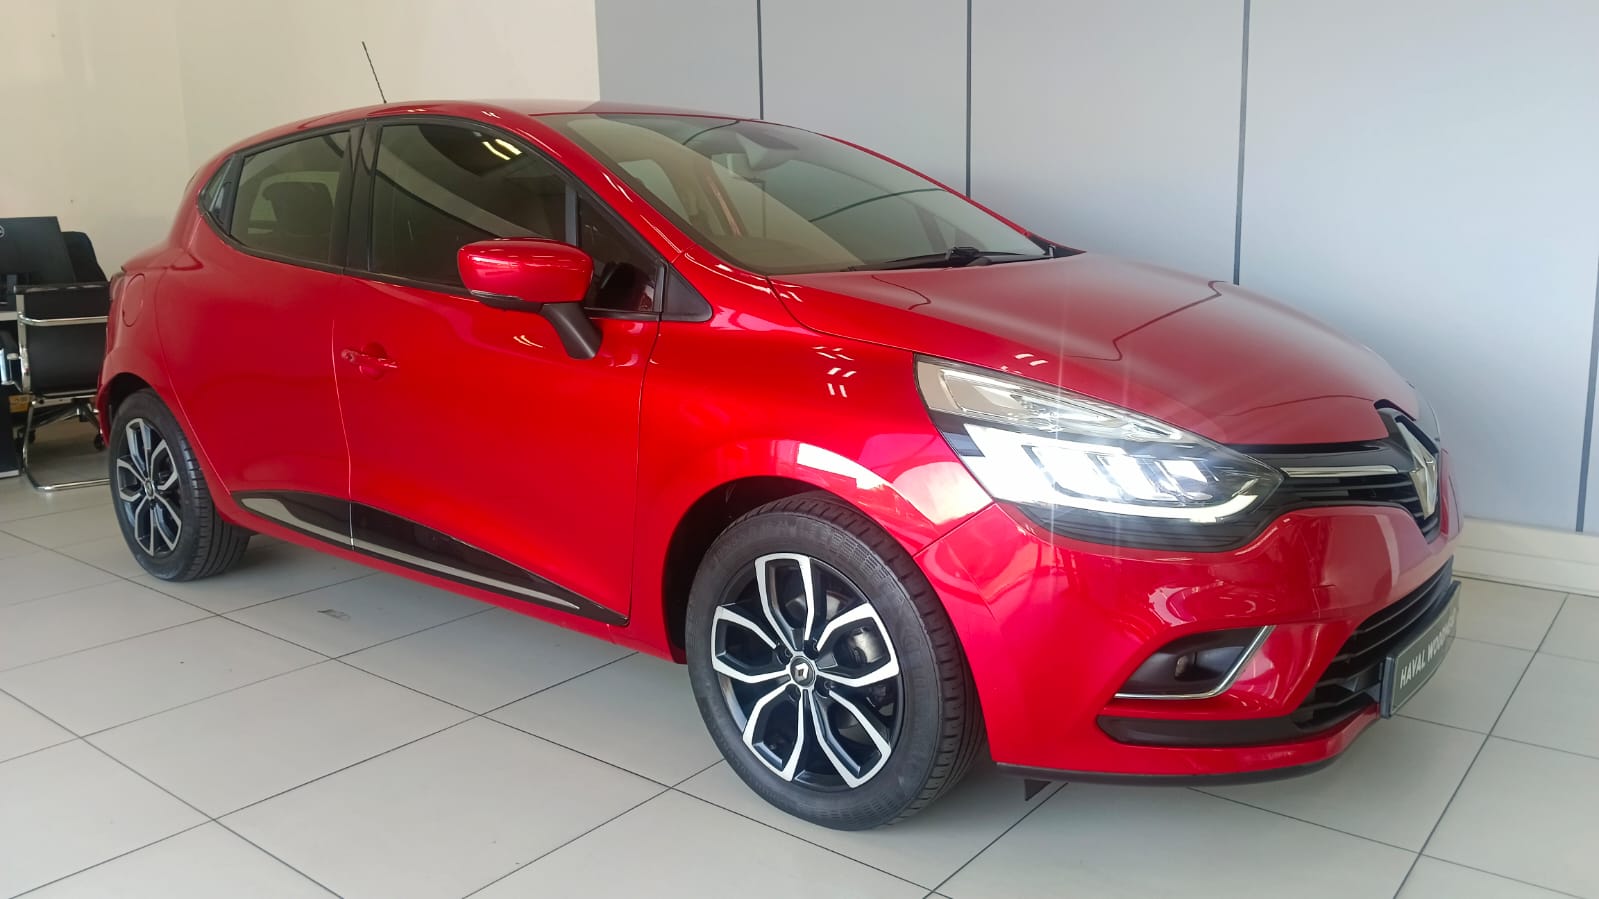 2020 Renault Clio  for sale - UH70745